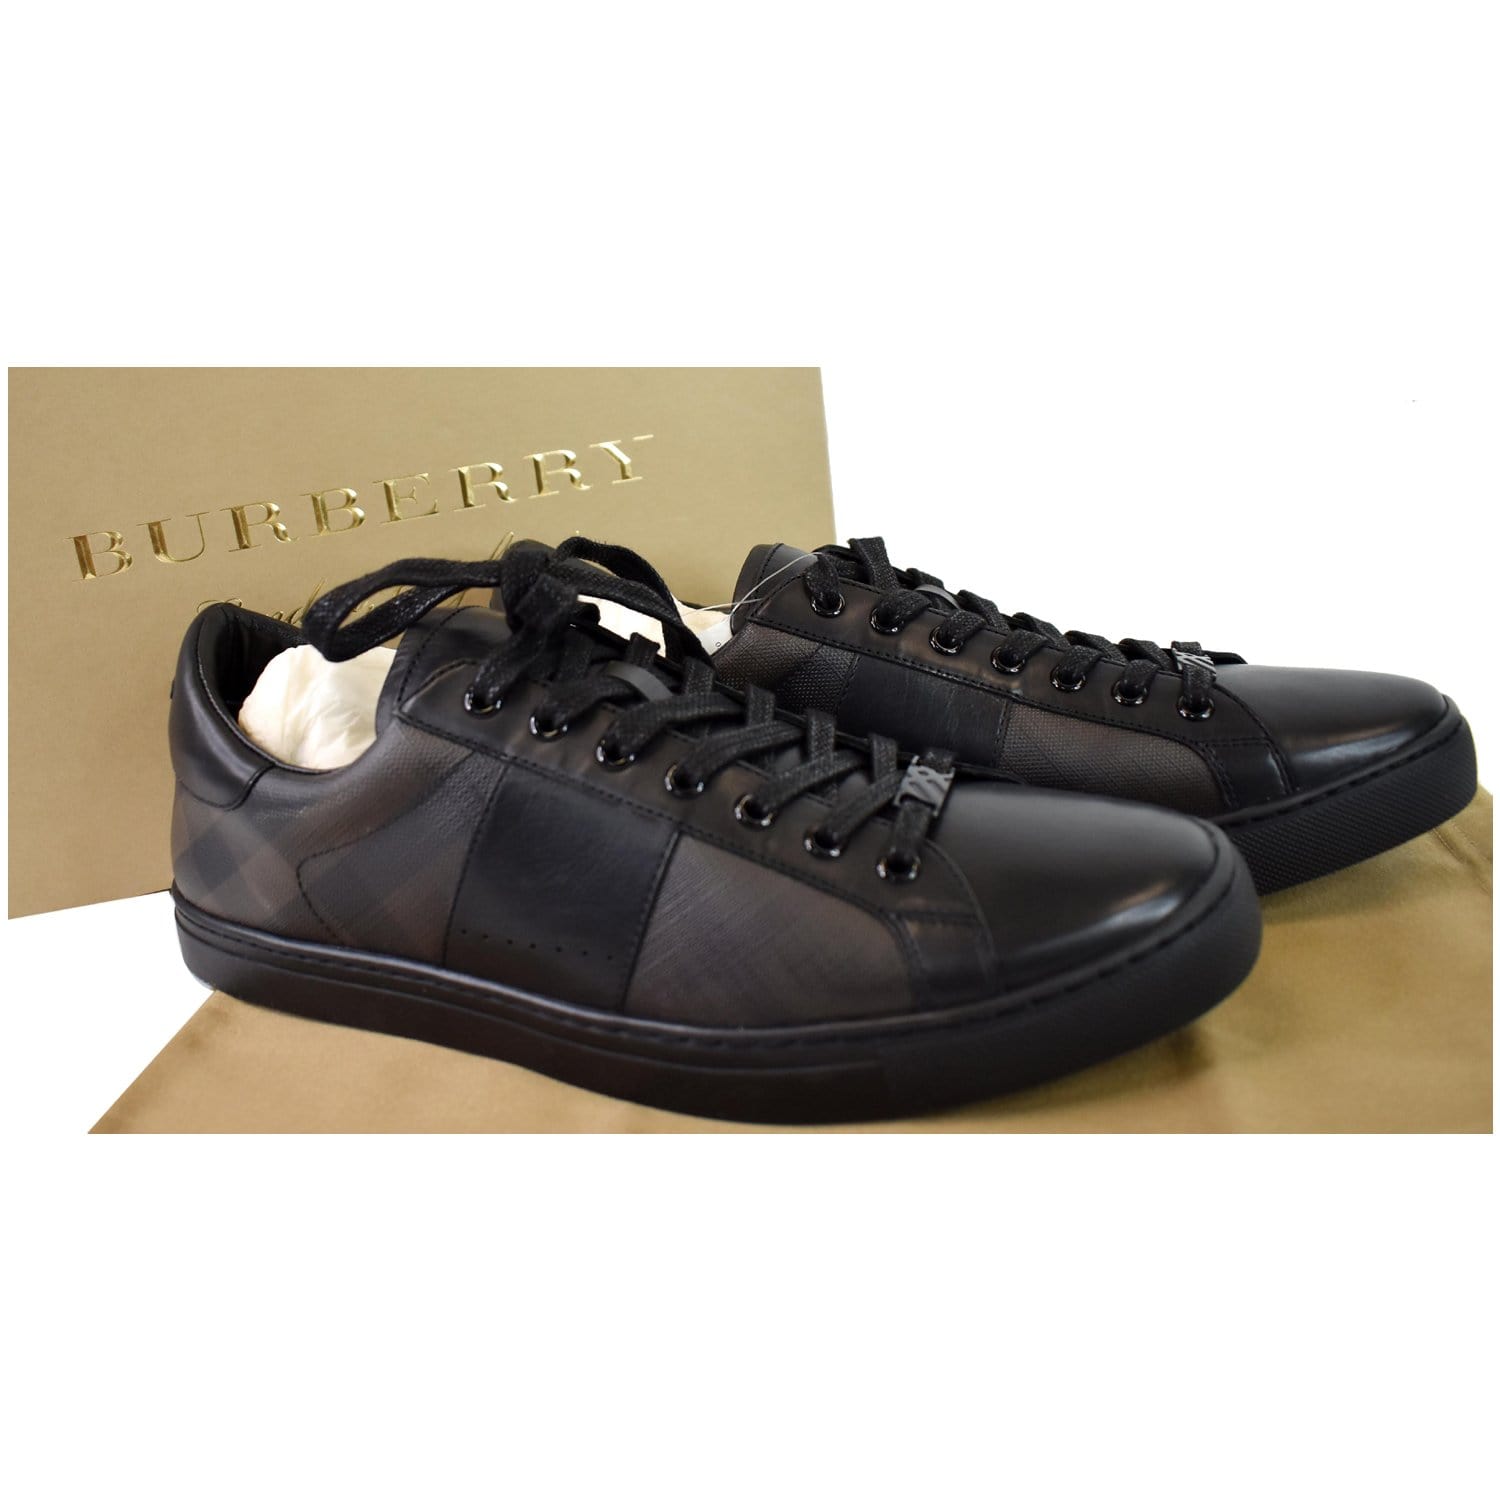 Real vs Fake Burberry sneakers. How to spot counterfeit Burberry London 